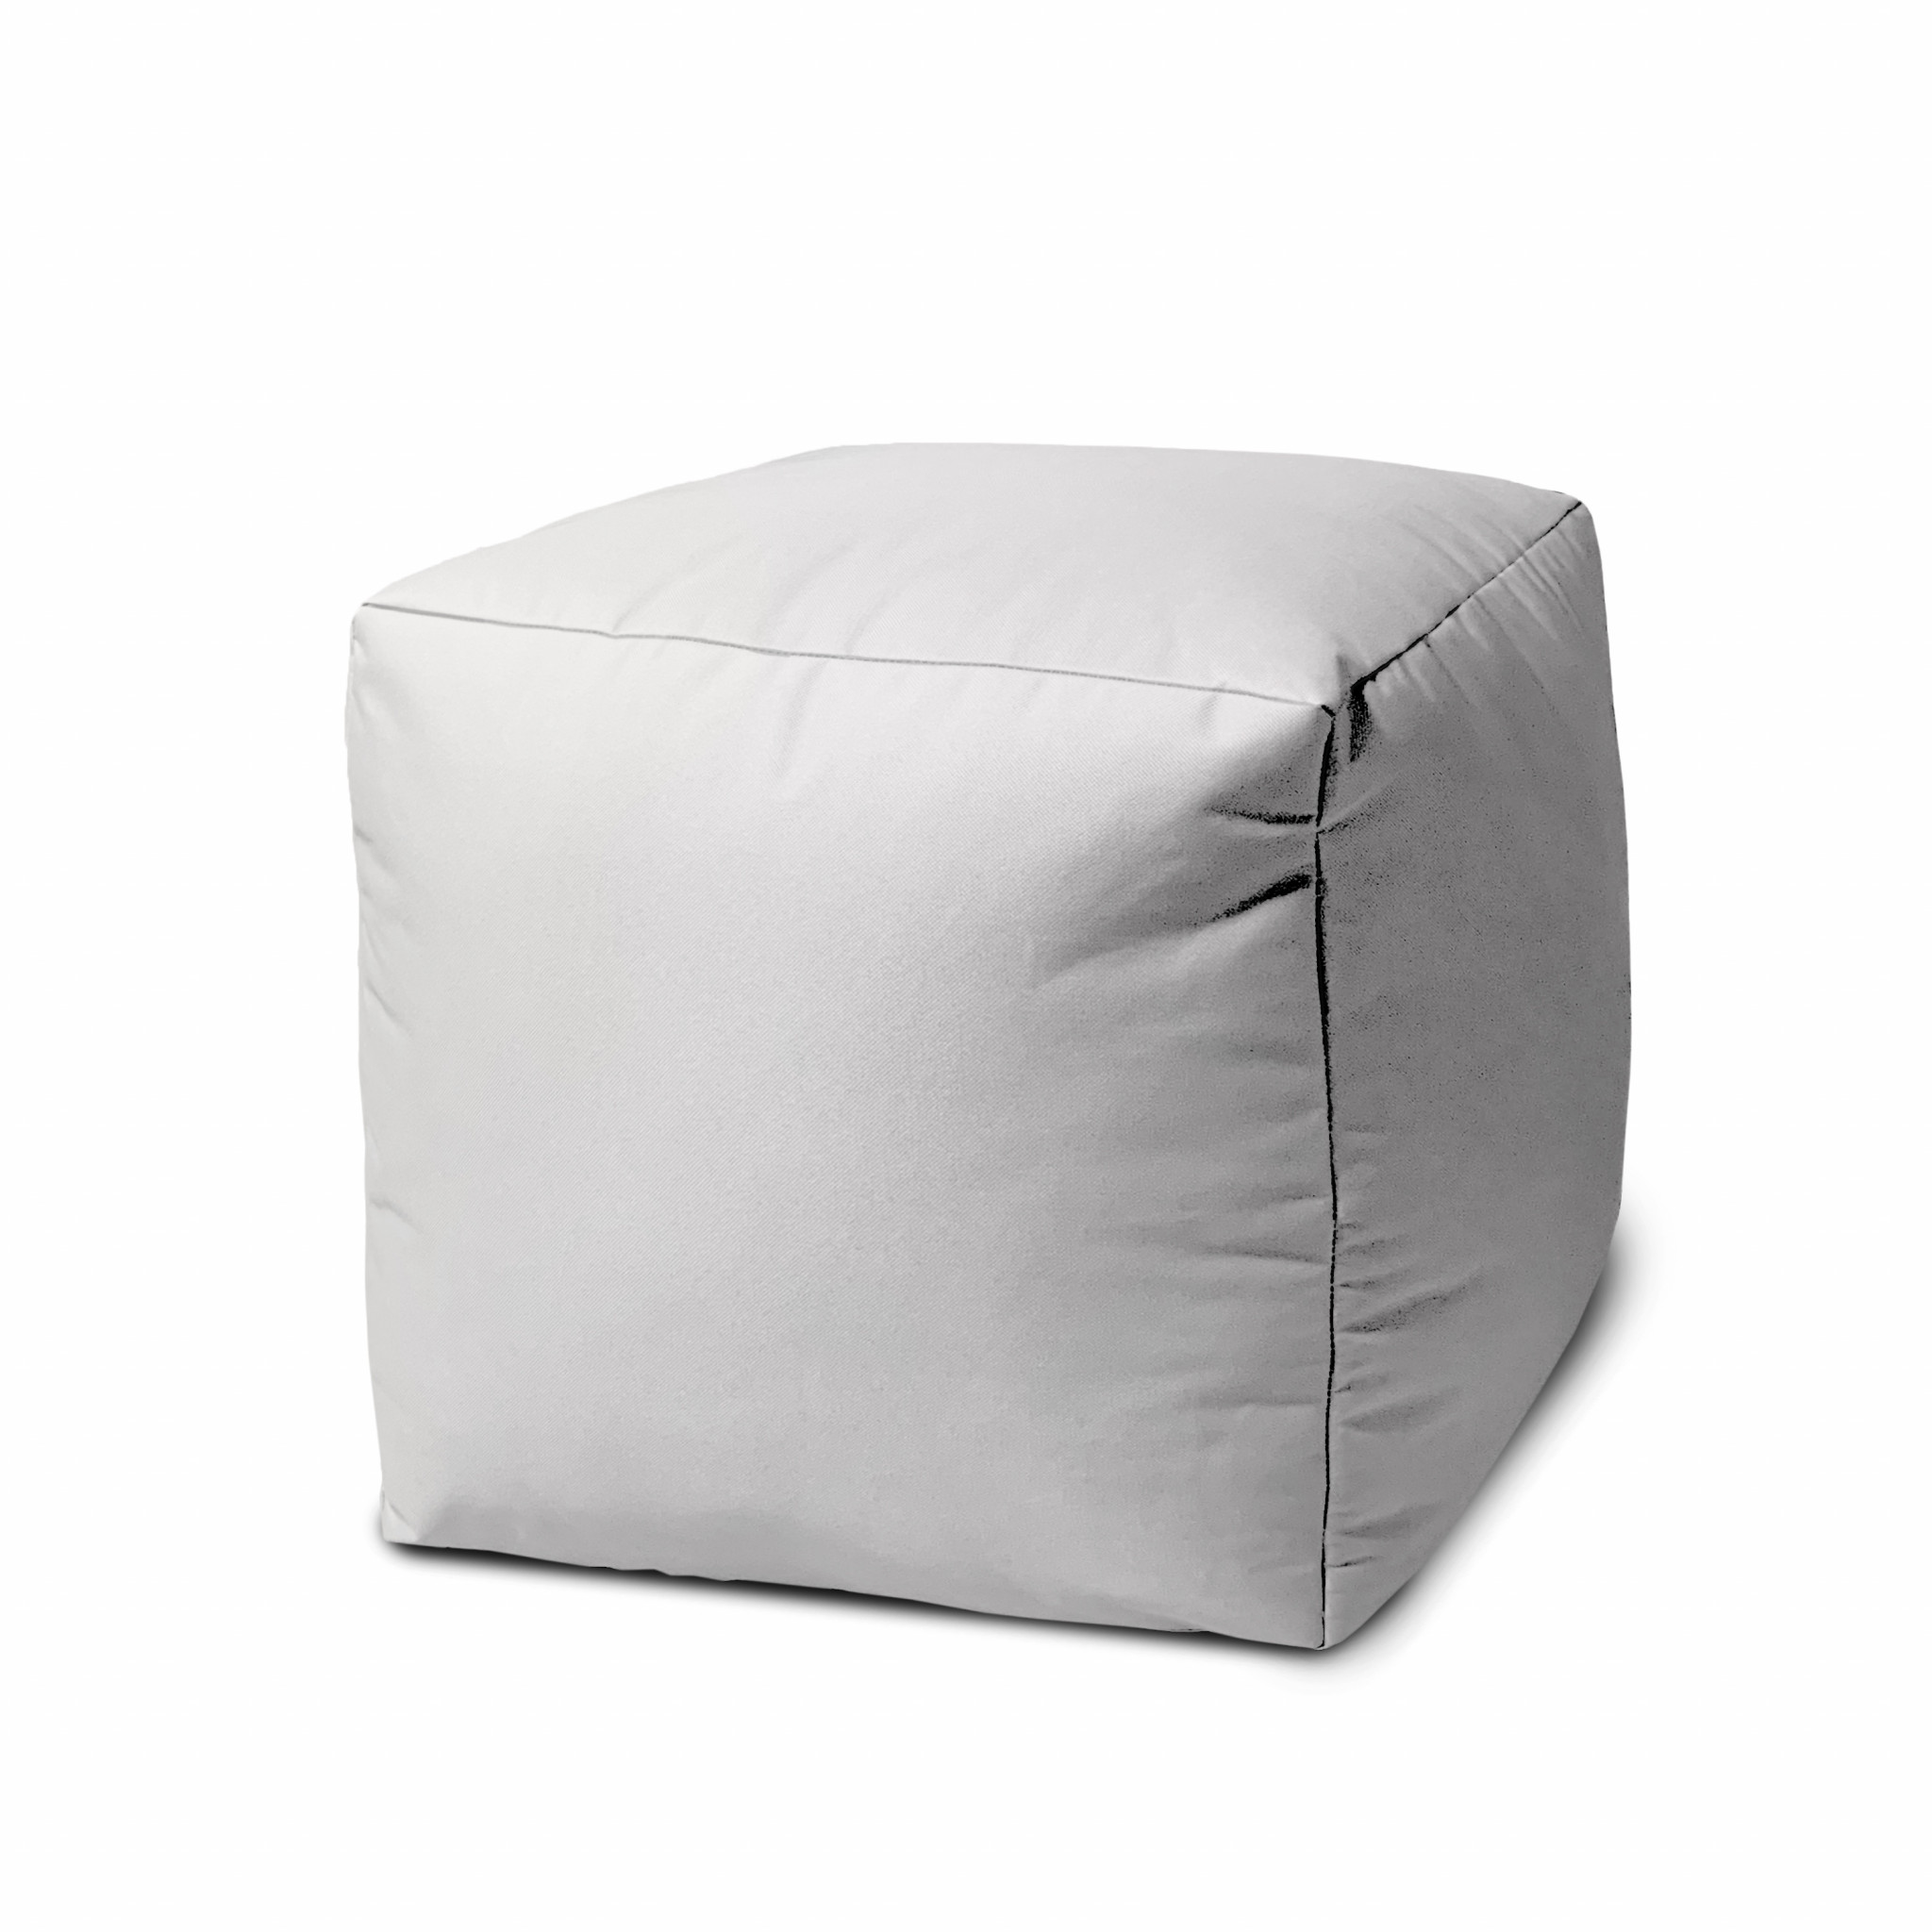 17" Cool Crisp White Solid Color Indoor Outdoor Pouf Ottoman-474129-1